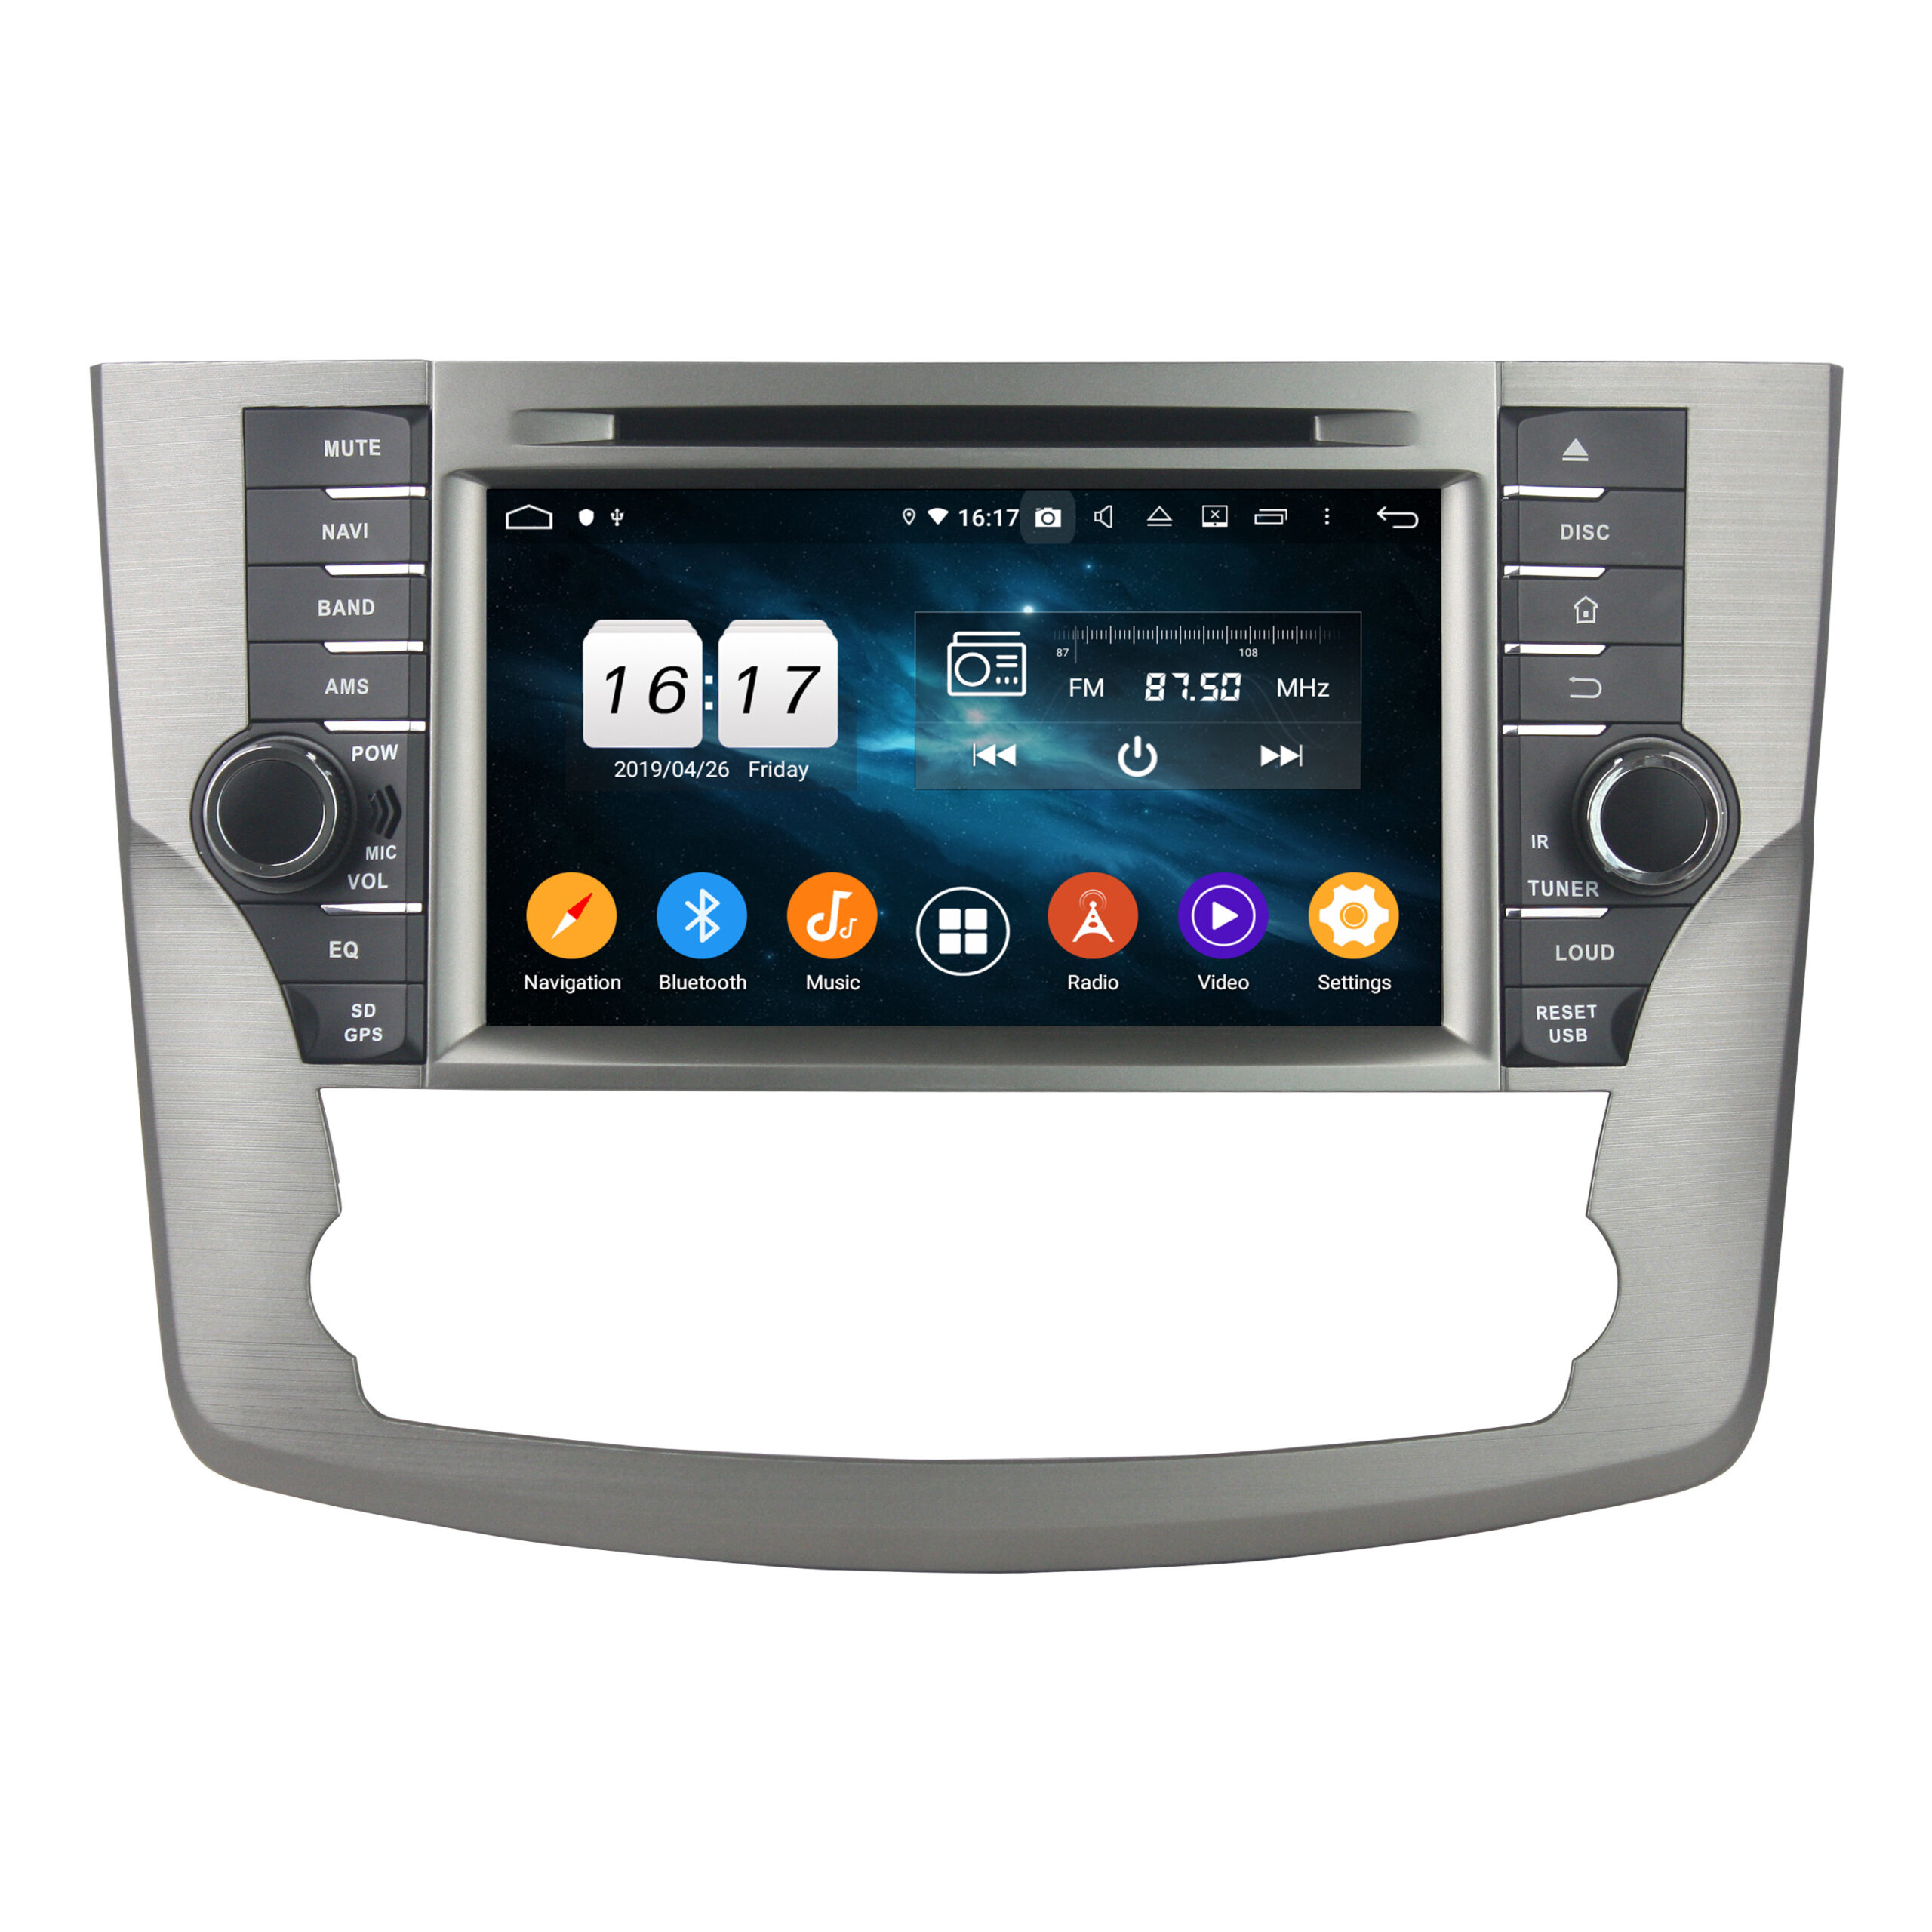 KD-8703 KLYDE car stereo android car video cheap bluetooth for Toyota Avalon